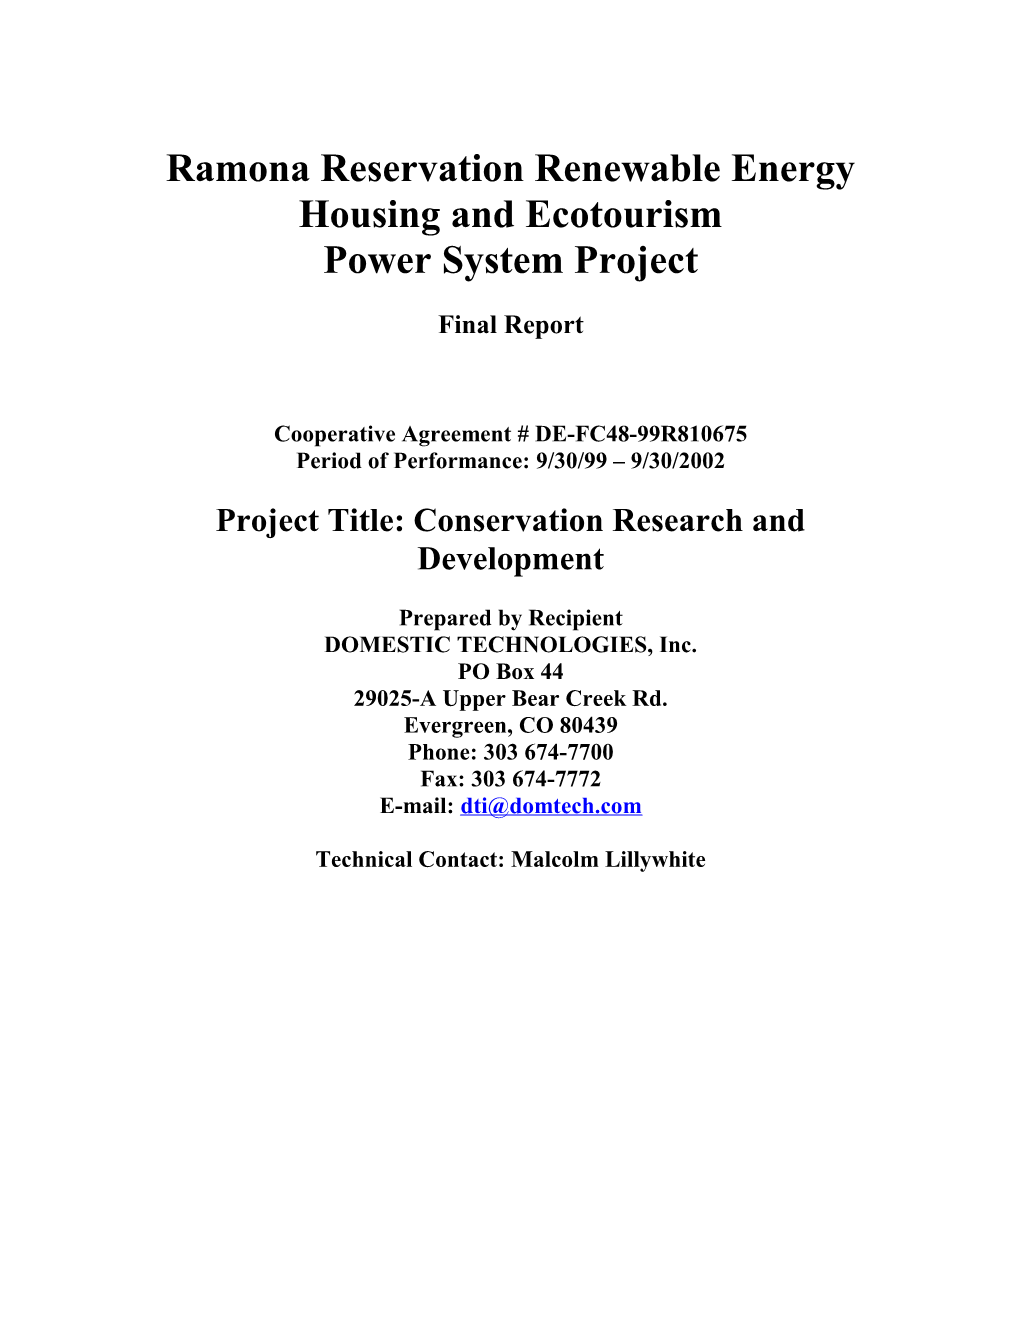 The Reservation Cultural and Economic Development Strategy Is Based on the Use of Renewable